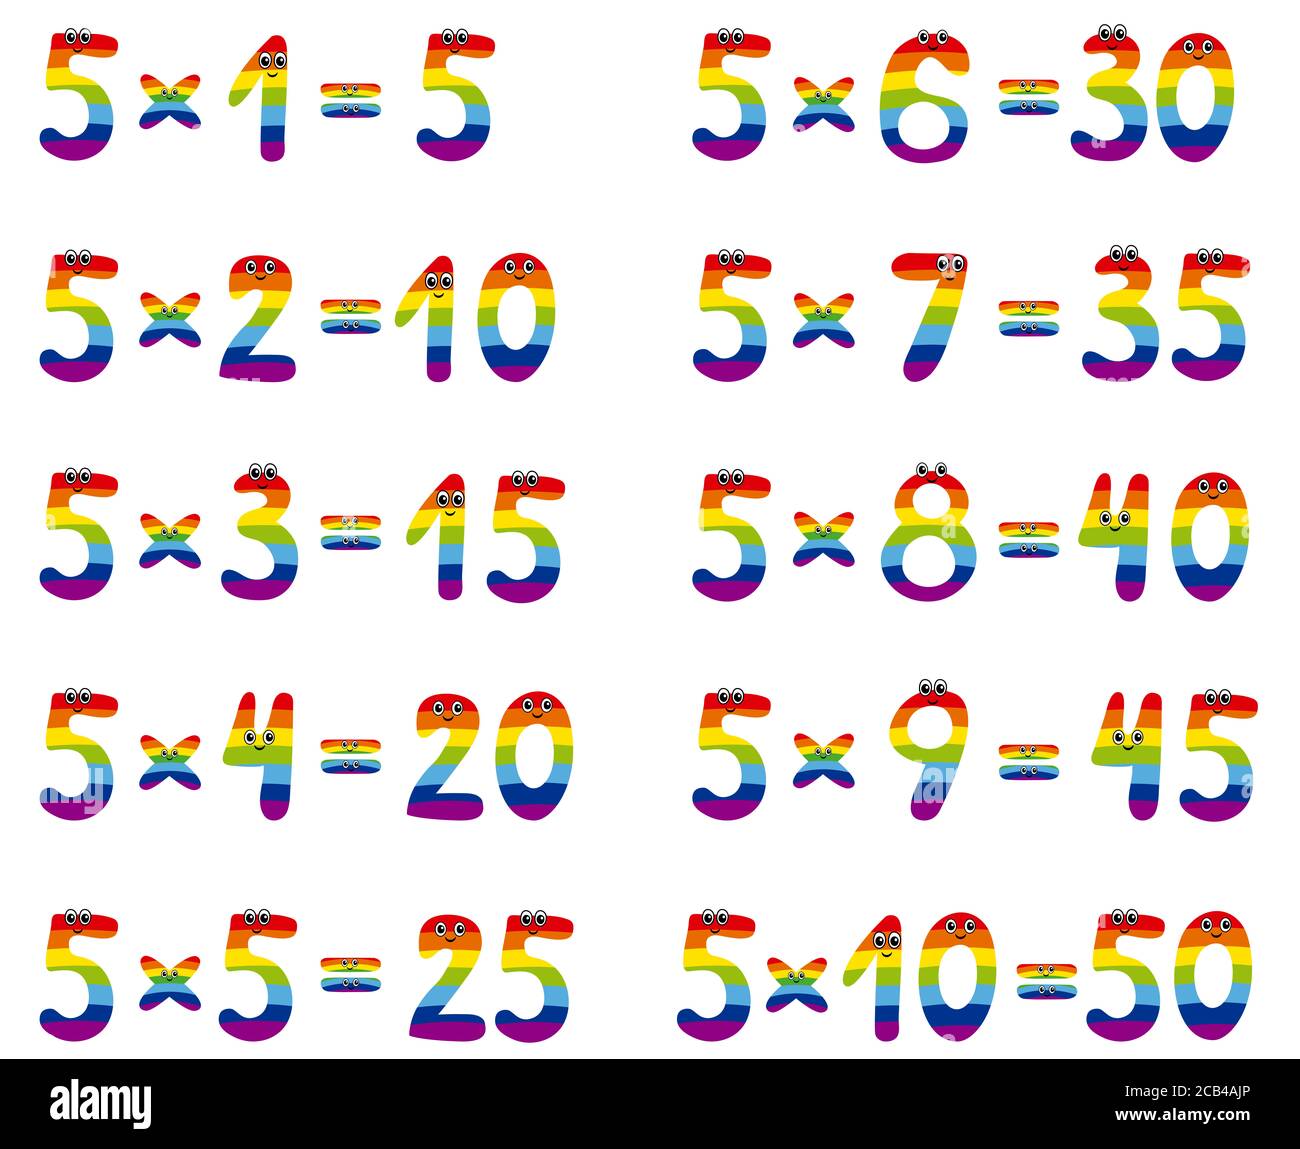 Multiplication table with cute numbers with a rainbow design. Stock Photo